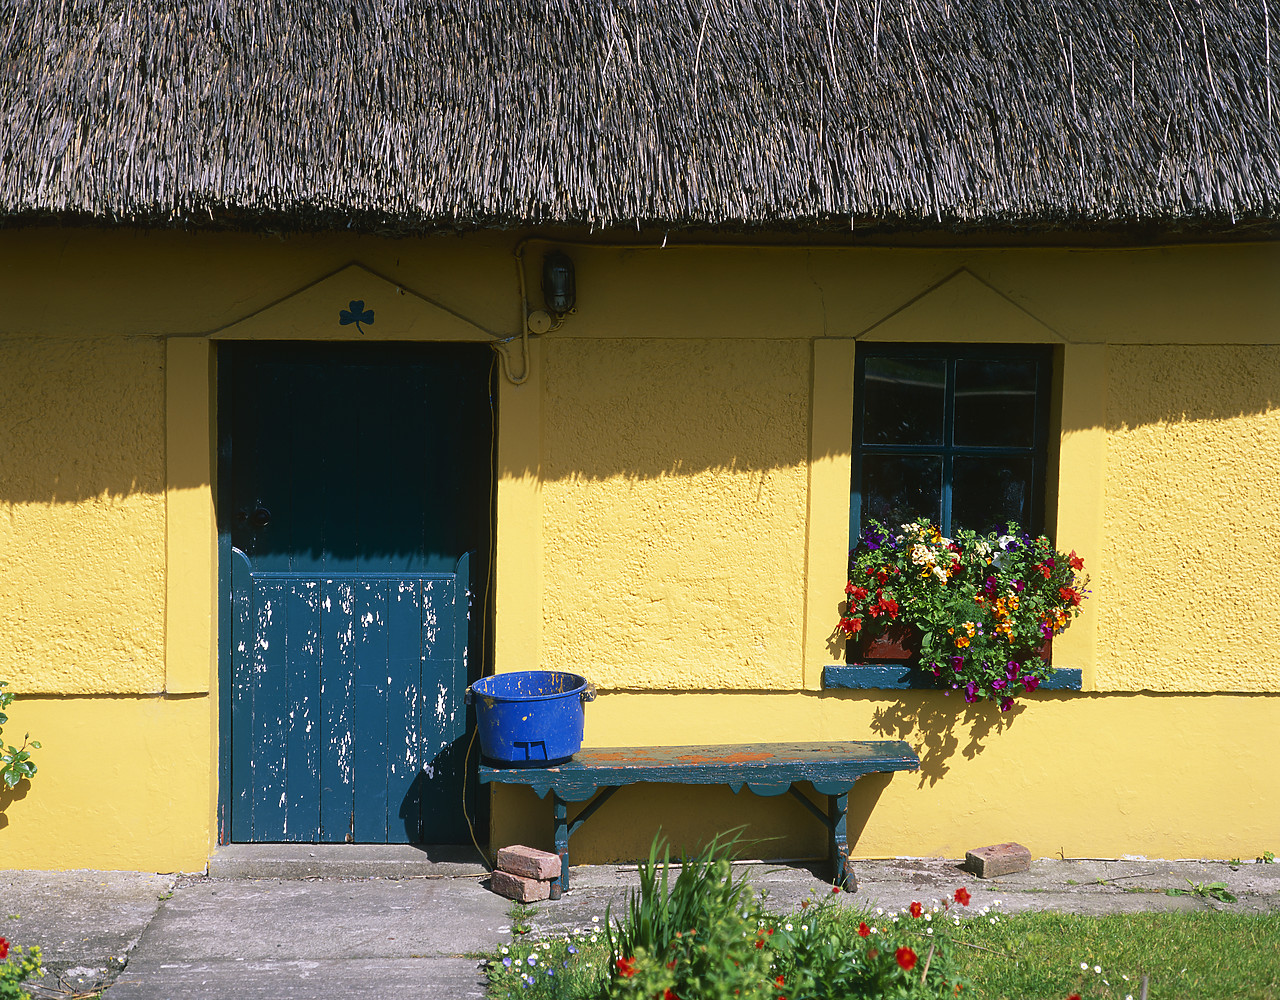 #990274-1 - Thatched Cottage, near Listowel, Co. Kerry, Ireland